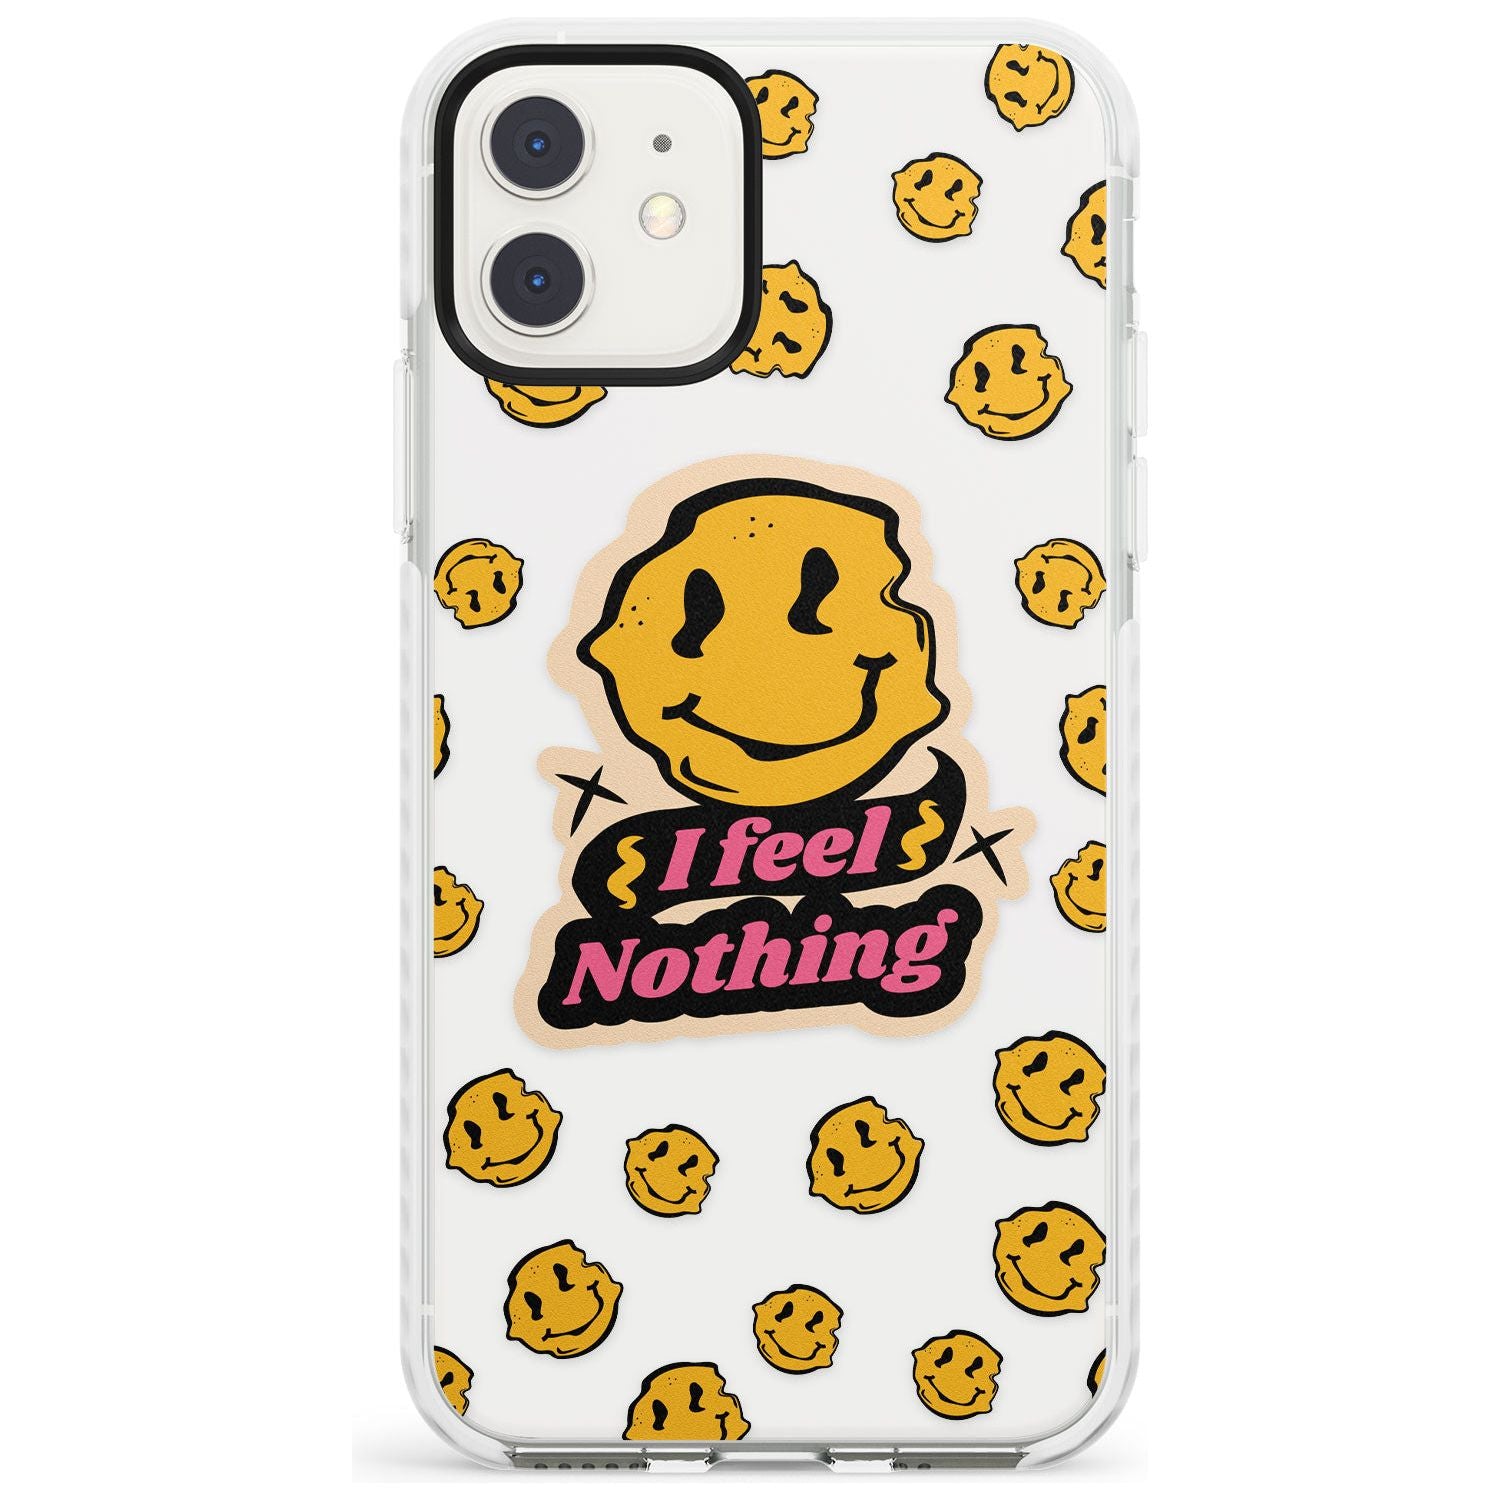 I feel nothing (Clear) Impact Phone Case for iPhone 11